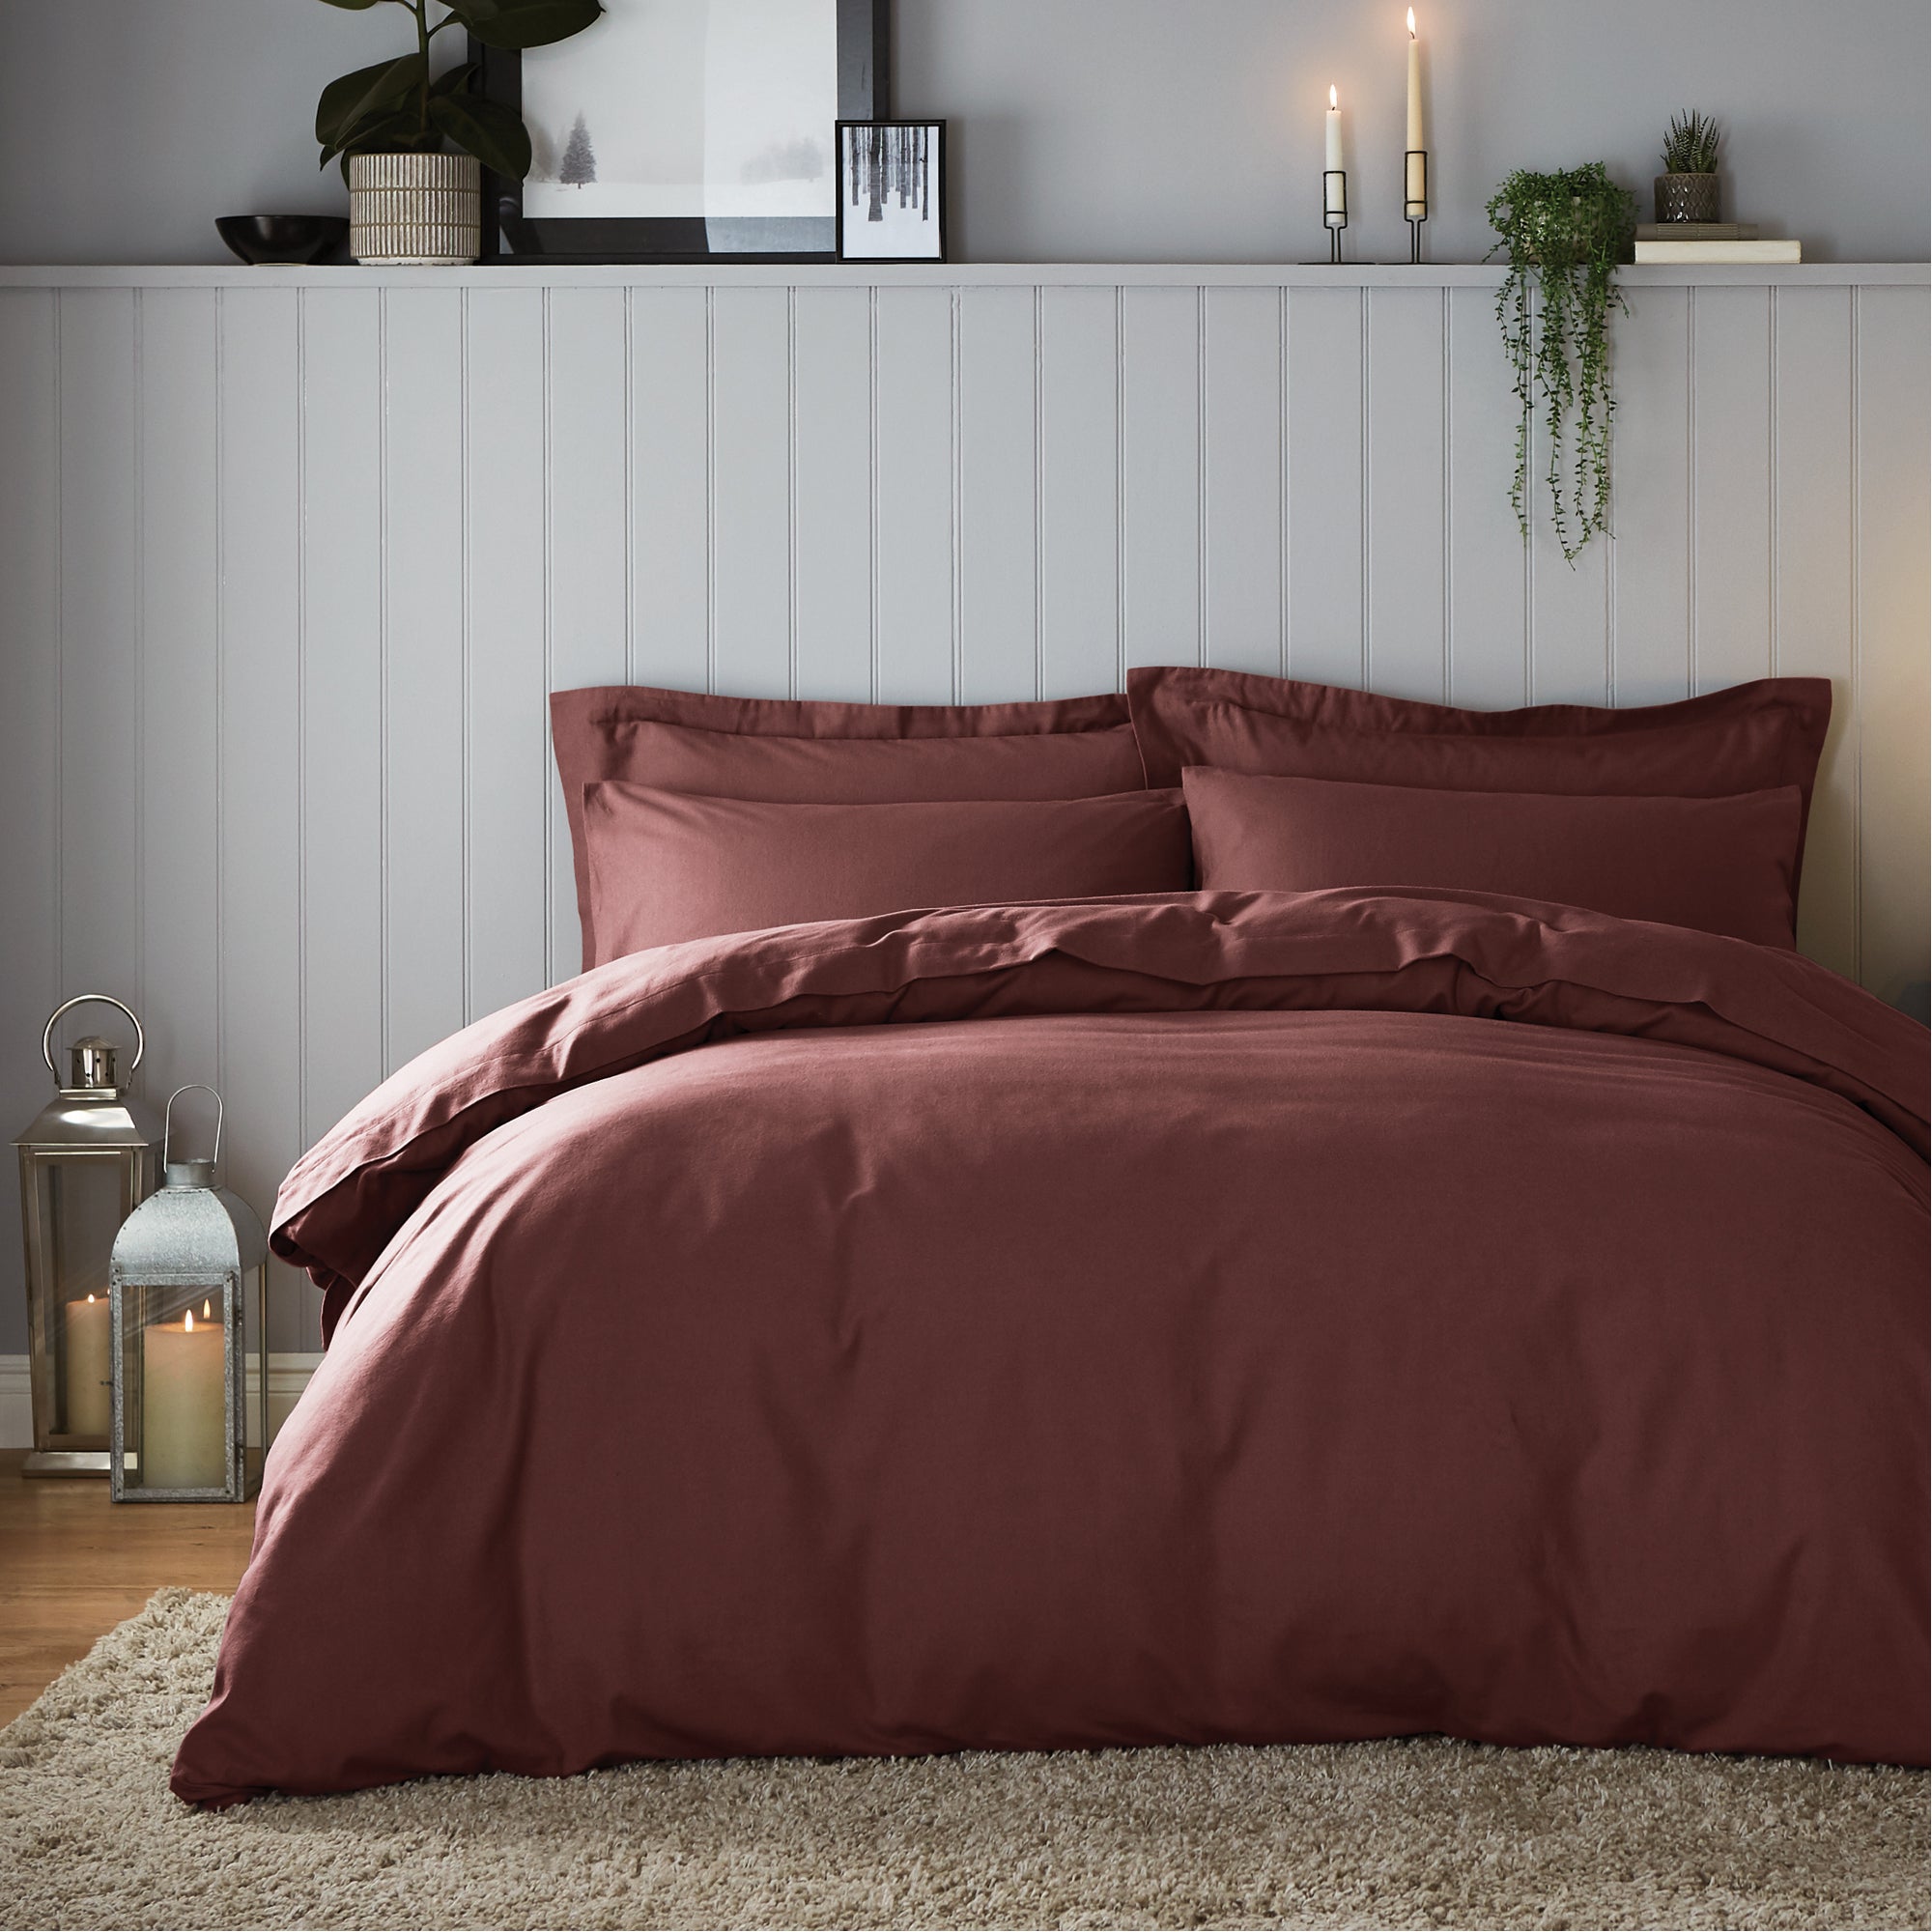 Soft Cosy Luxury Brushed Cotton Claret Duvet Cover And Pillowcase Set Red